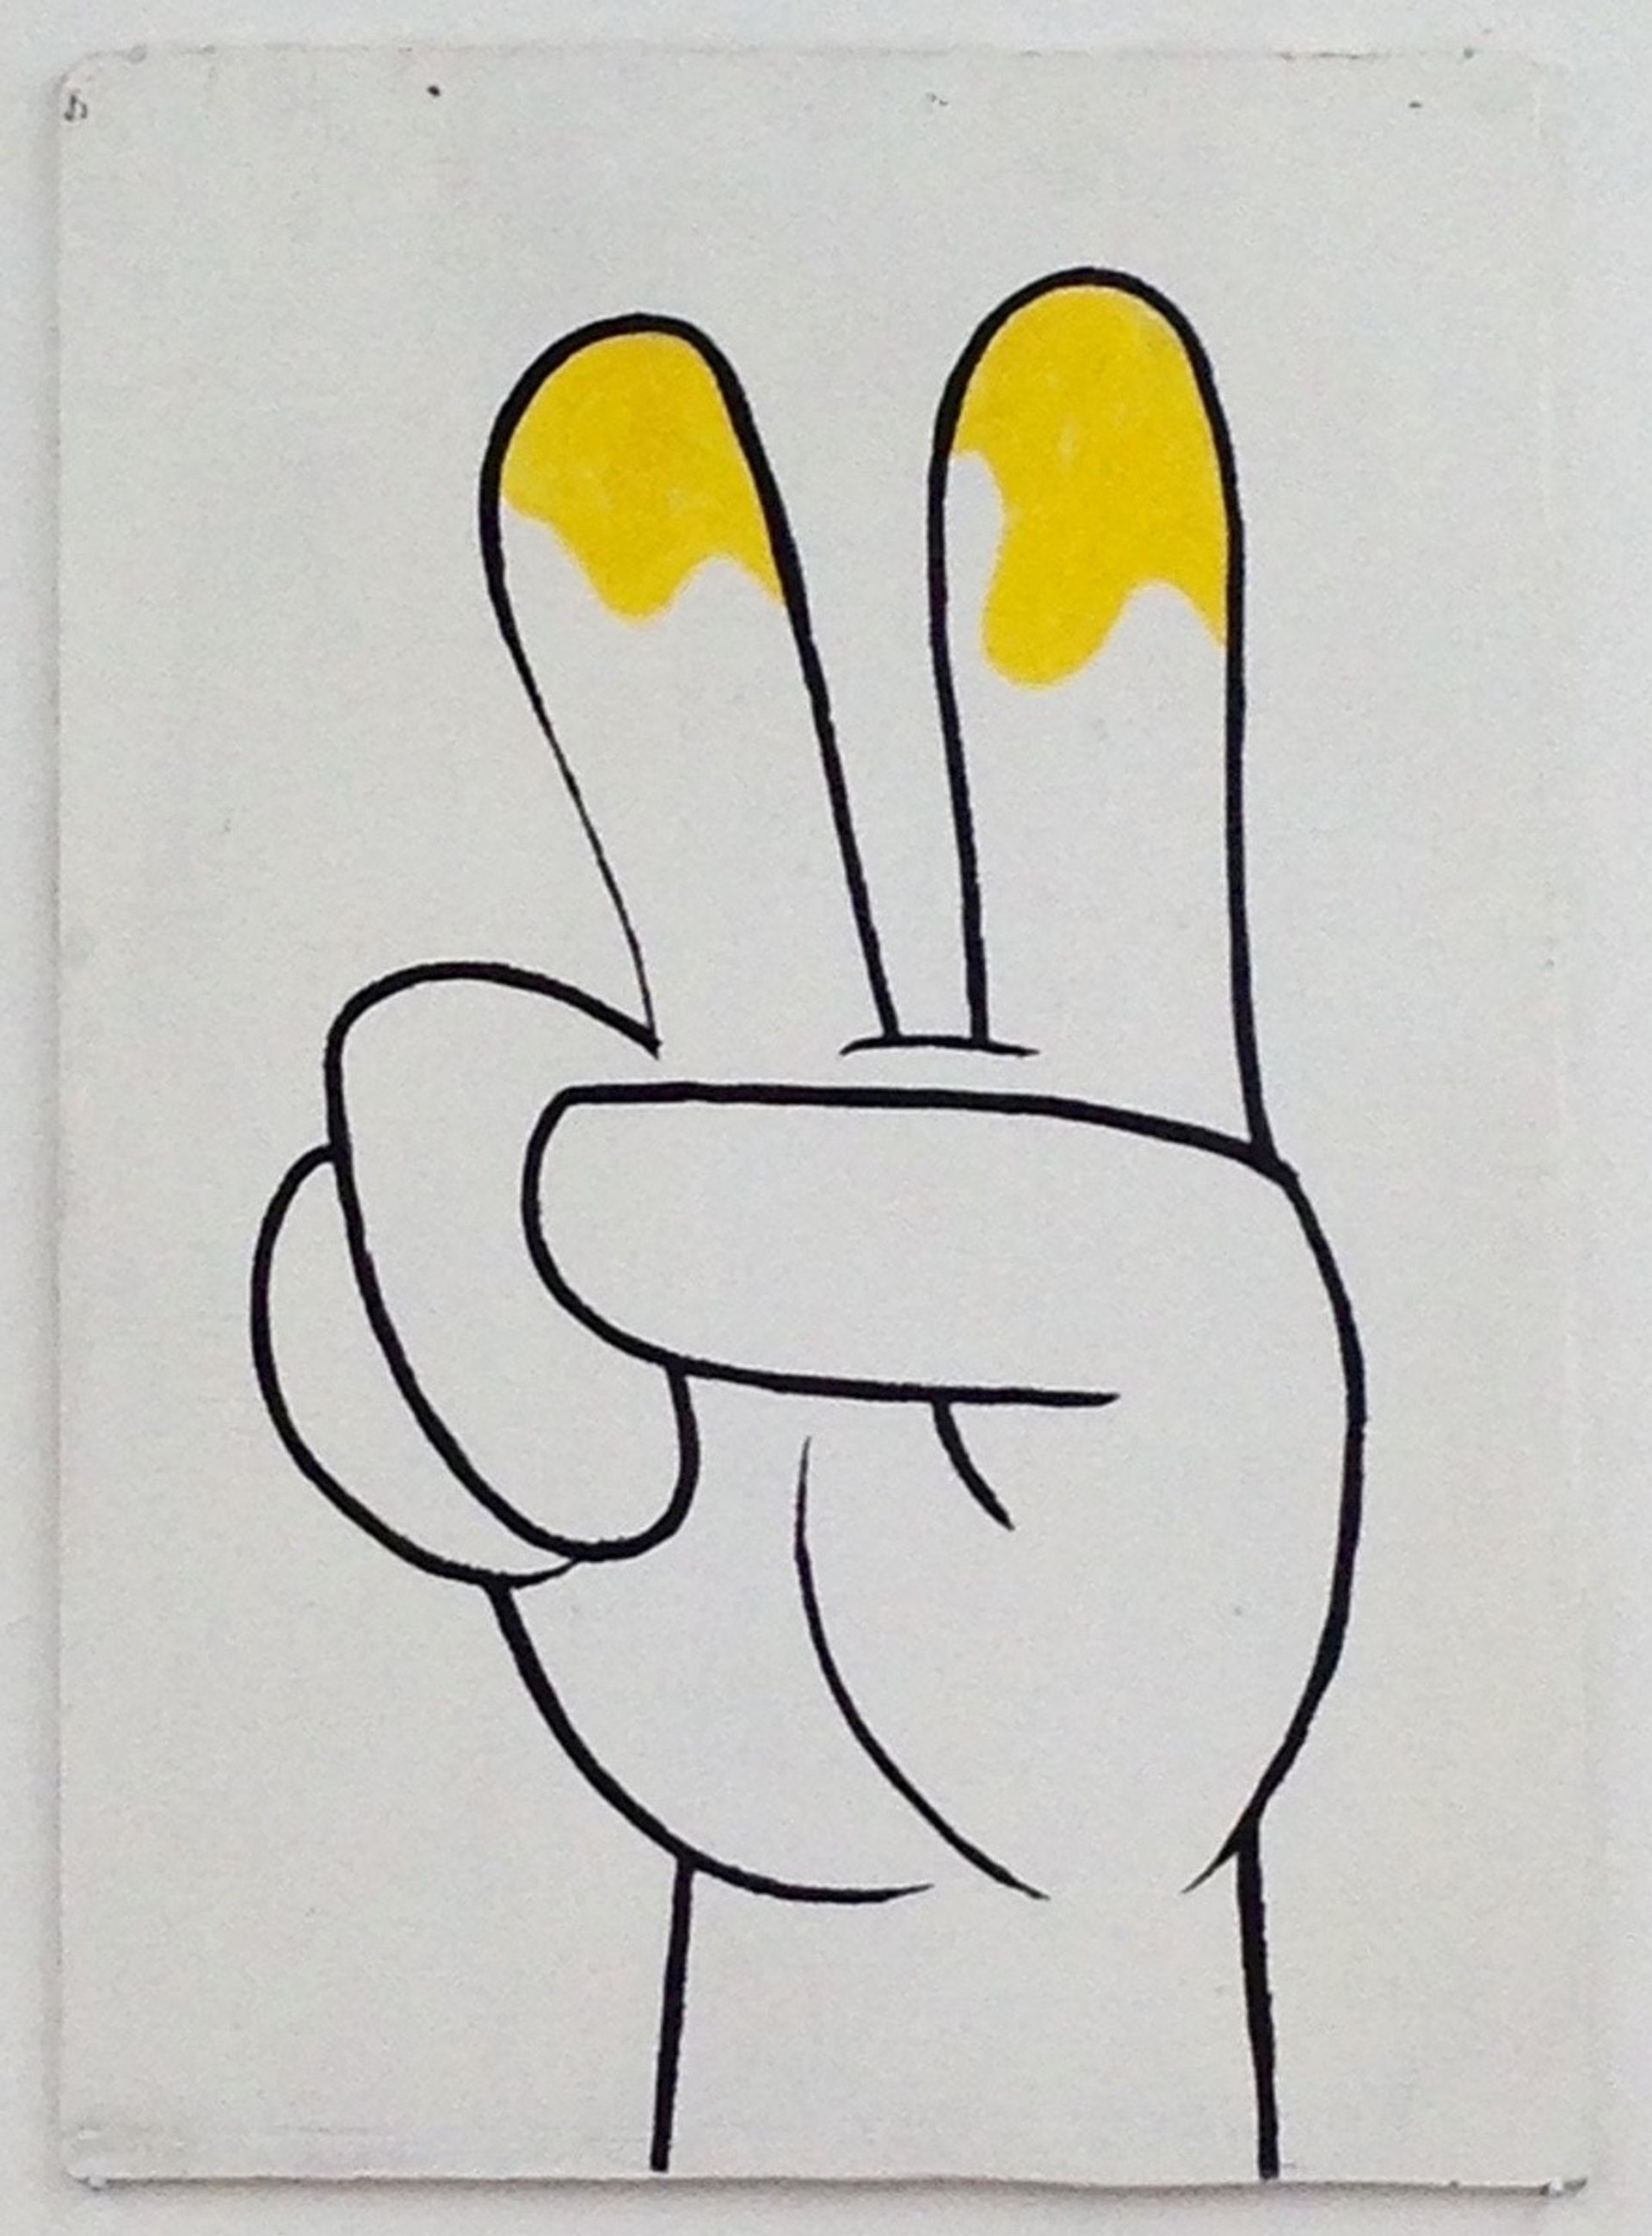 Anna McCarthy, Peece Fingers, 2016, lacquer, permanent marker and pastel on wood, 55 × 40 cm